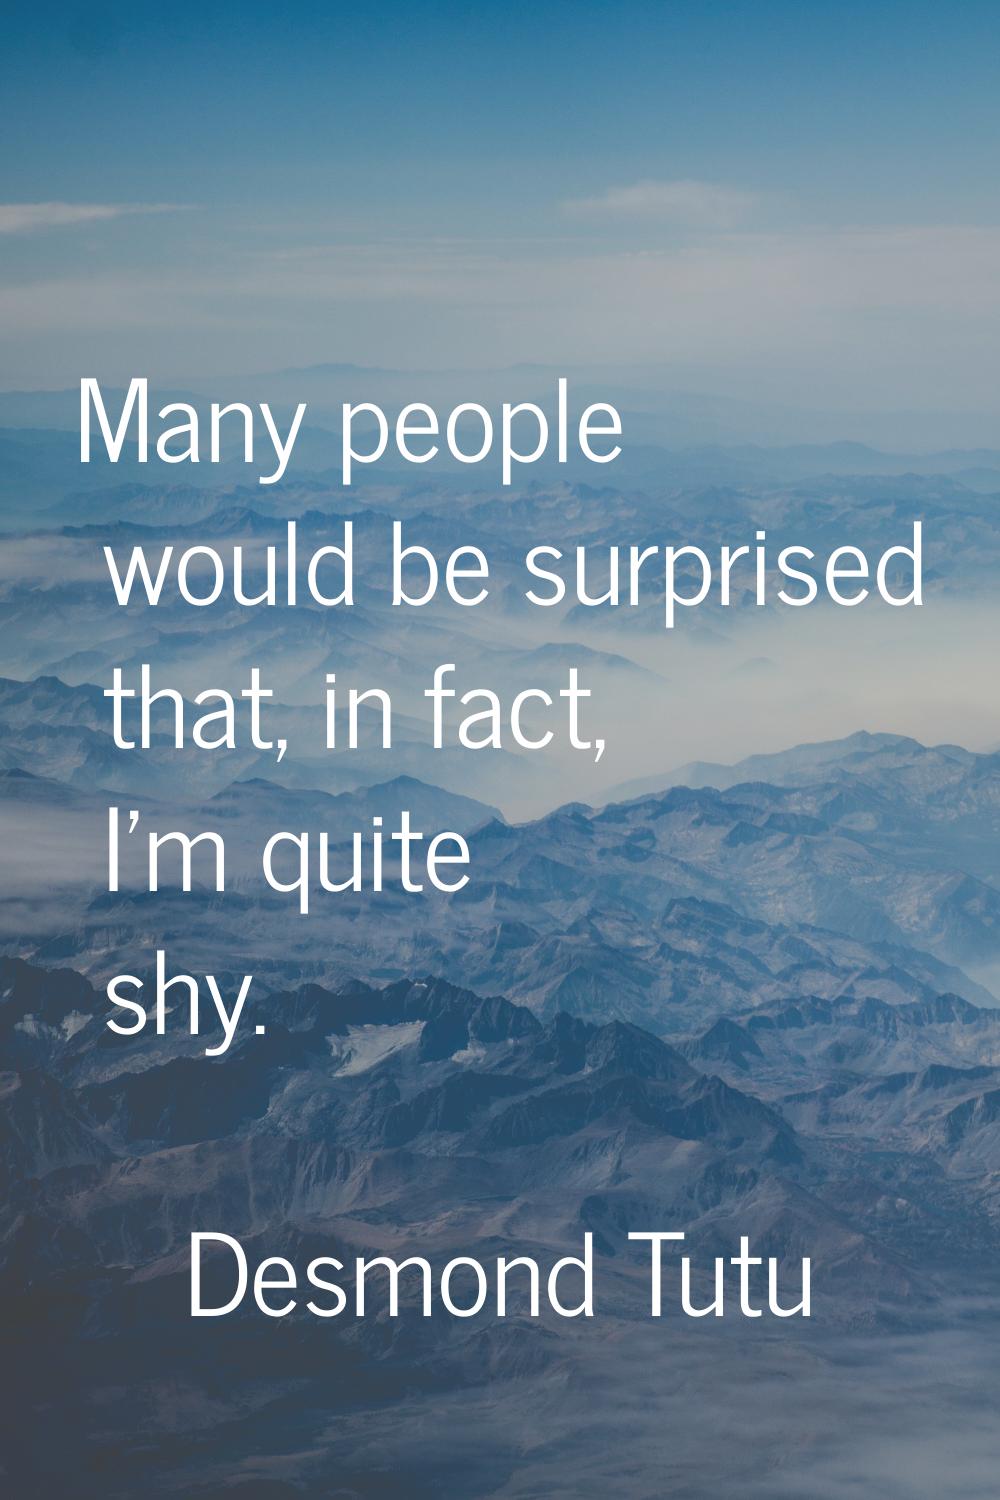 Many people would be surprised that, in fact, I'm quite shy.